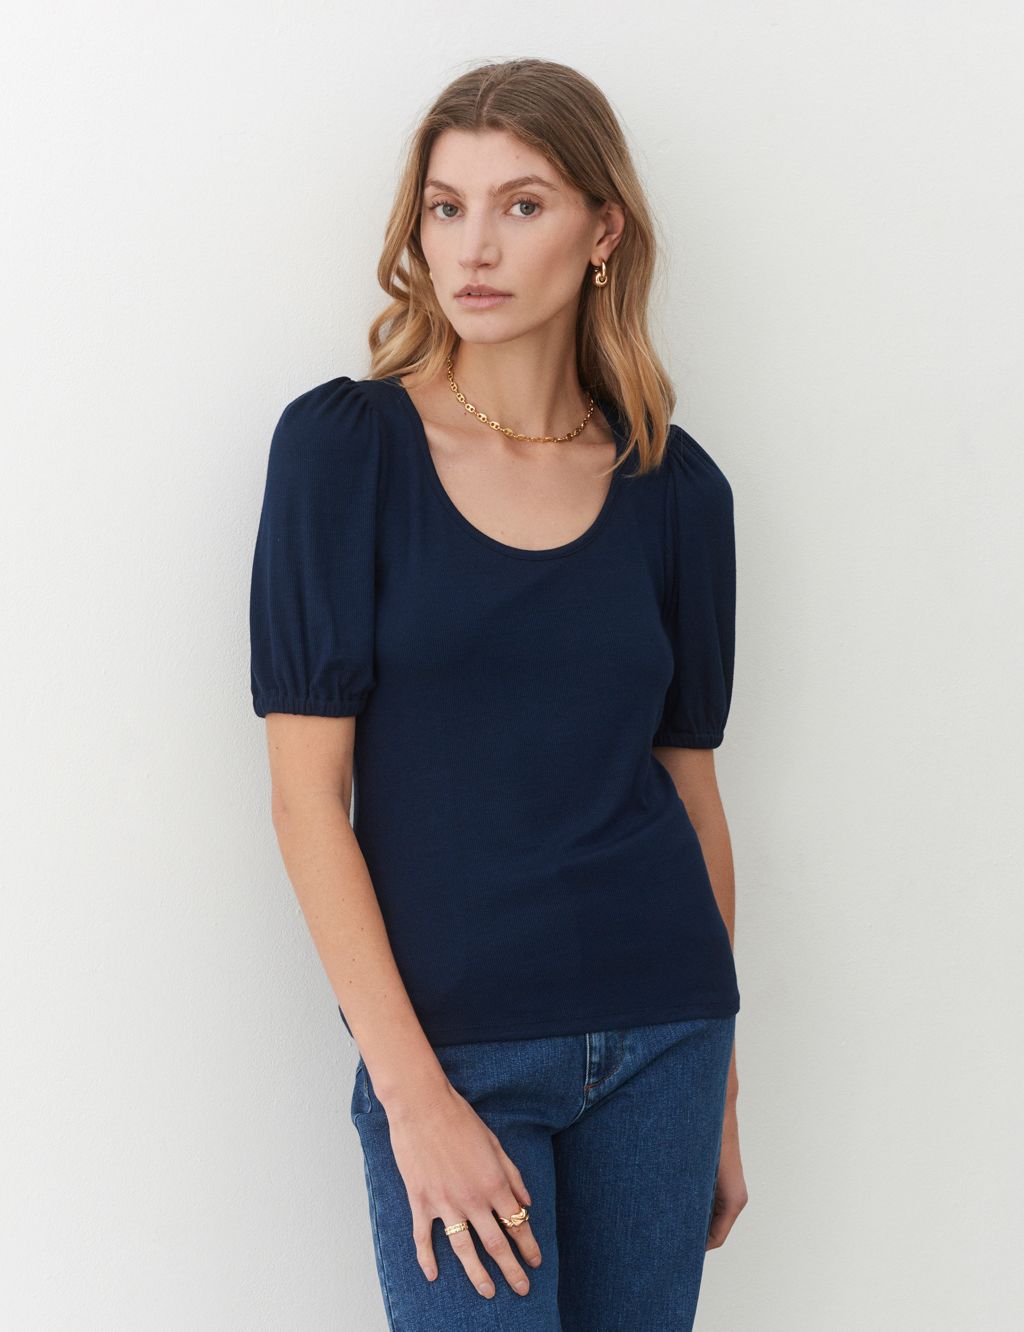 Puff Sleeve Top | Finery London | M&S